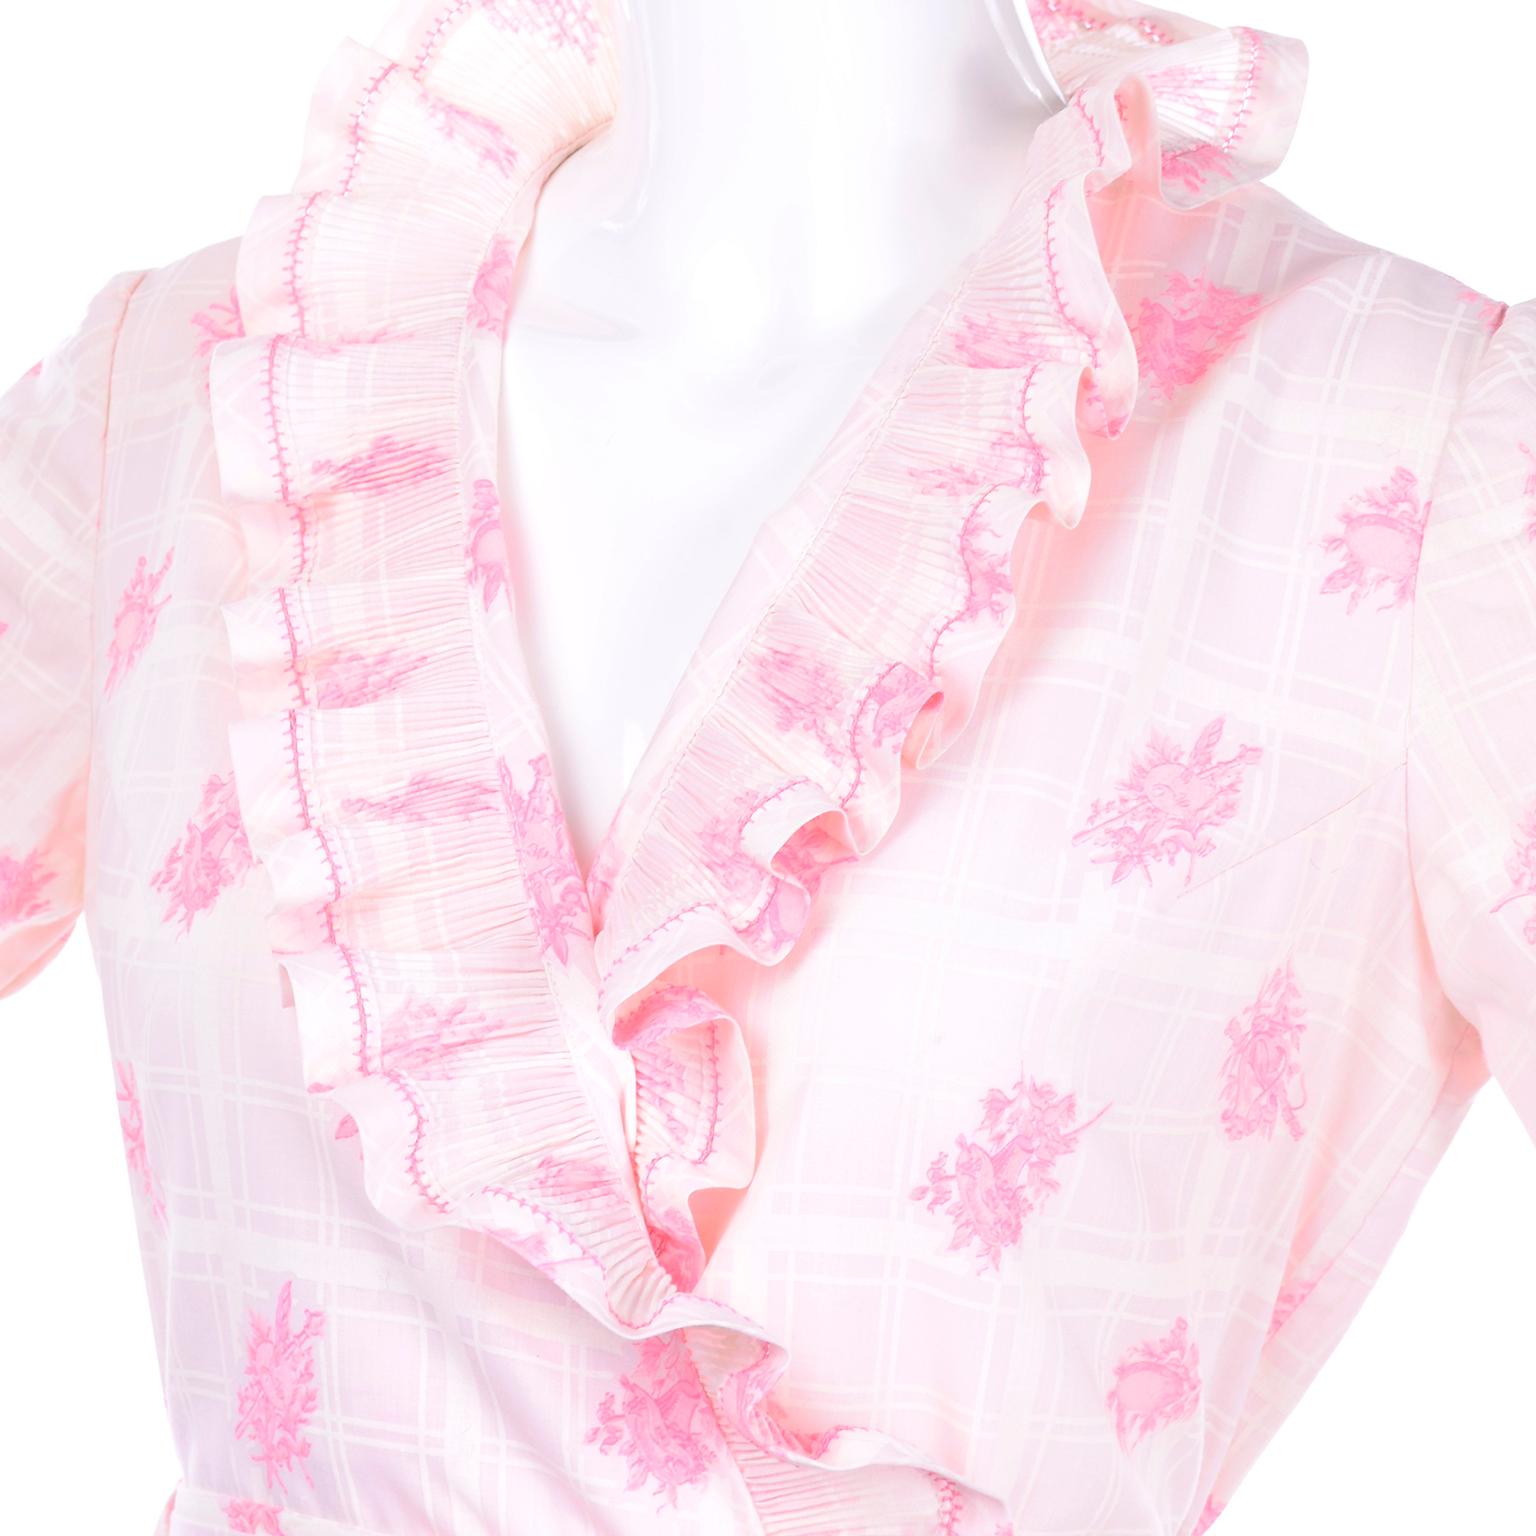 Bill Tice 1970s Vintage Pink & White Toile Ruffled Cotton Wrap Dress Size 6 2